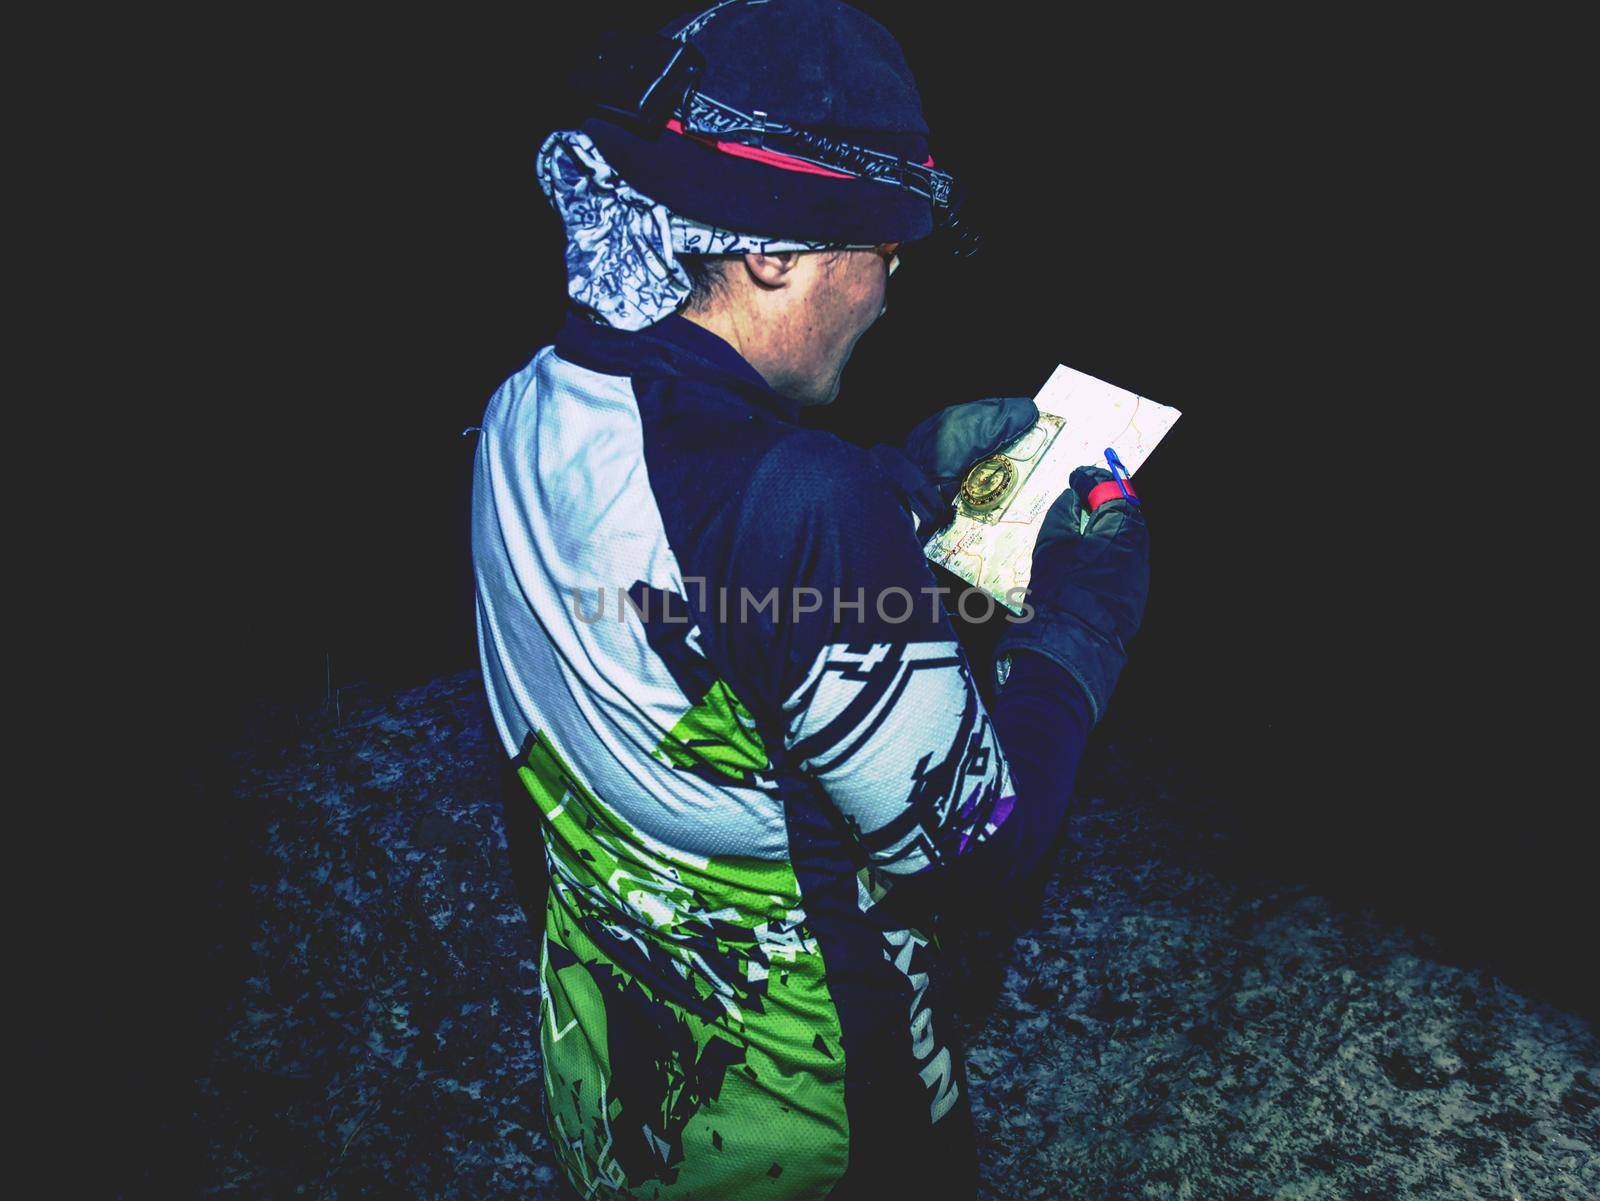 Winter night runner control possition. Girl in forest reading map by rdonar2